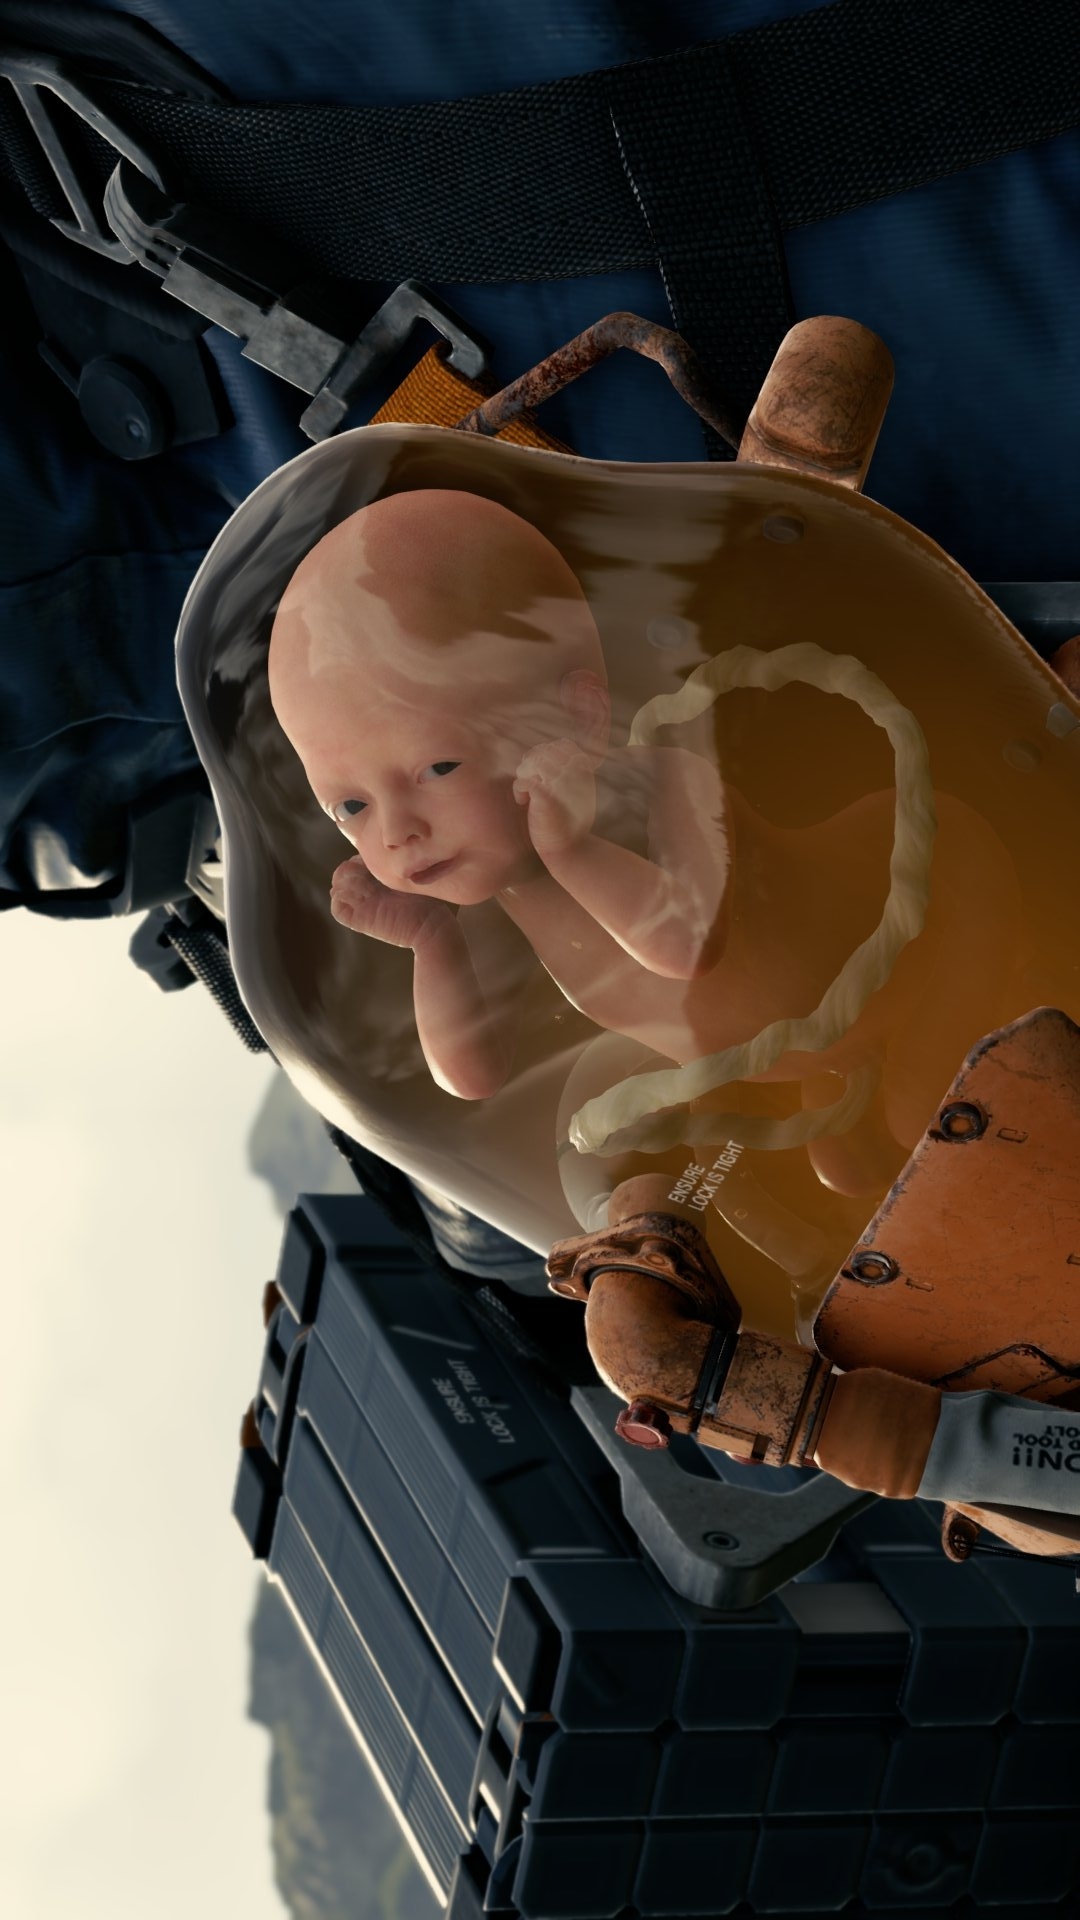 General 1080x1920 Death Stranding video games baby umbilical cord Kojima Productions 505 Games video game characters